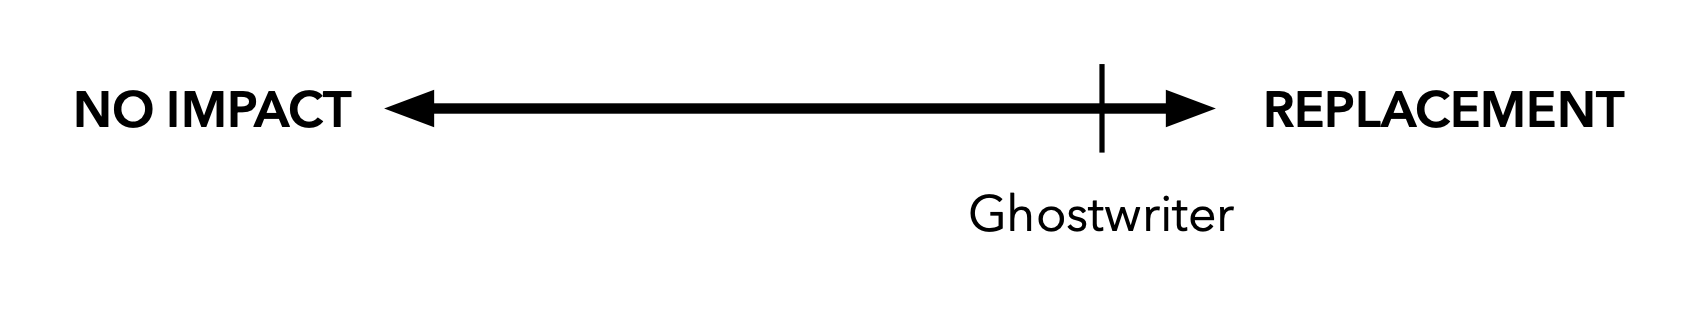 The previous continuum showing a mark near ‘replacement‘ which reads ‘ghostwriter‘